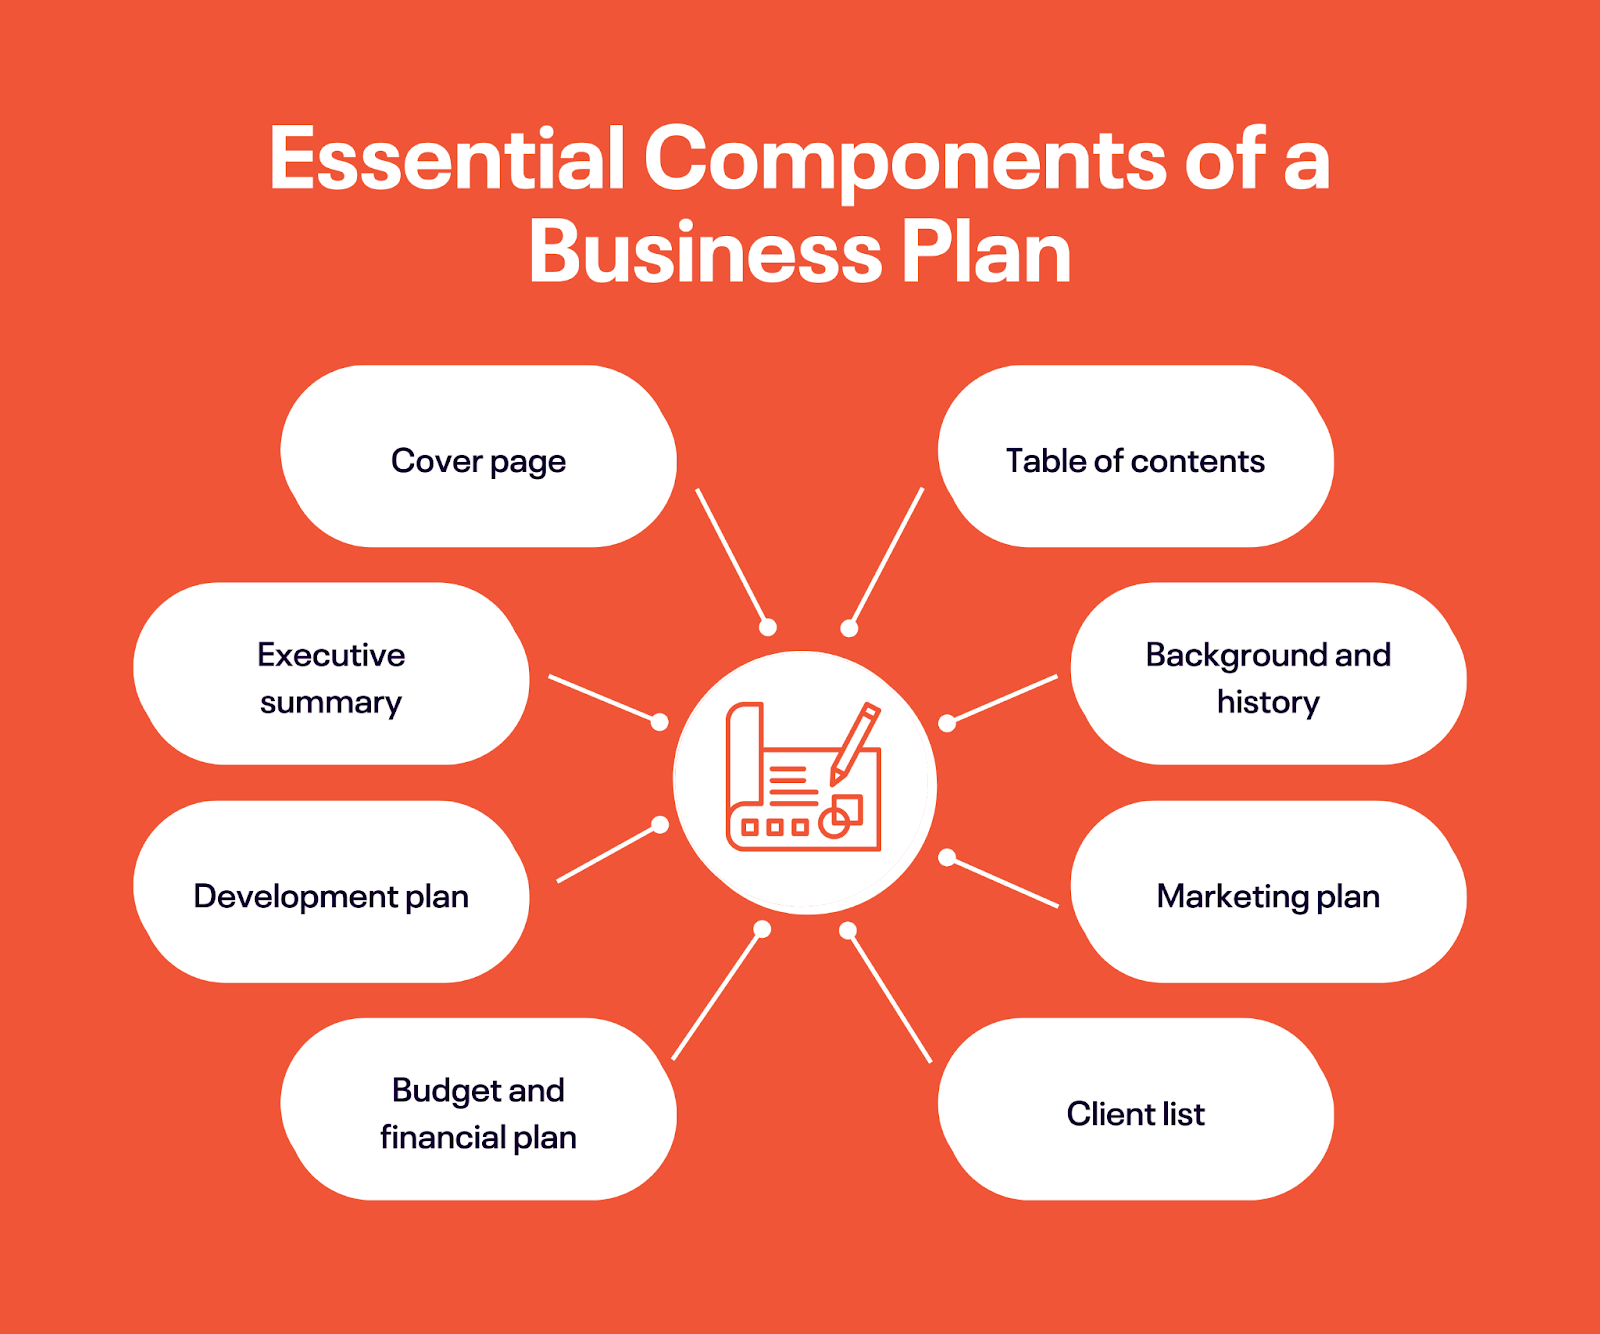 8 essential components of a business plan.